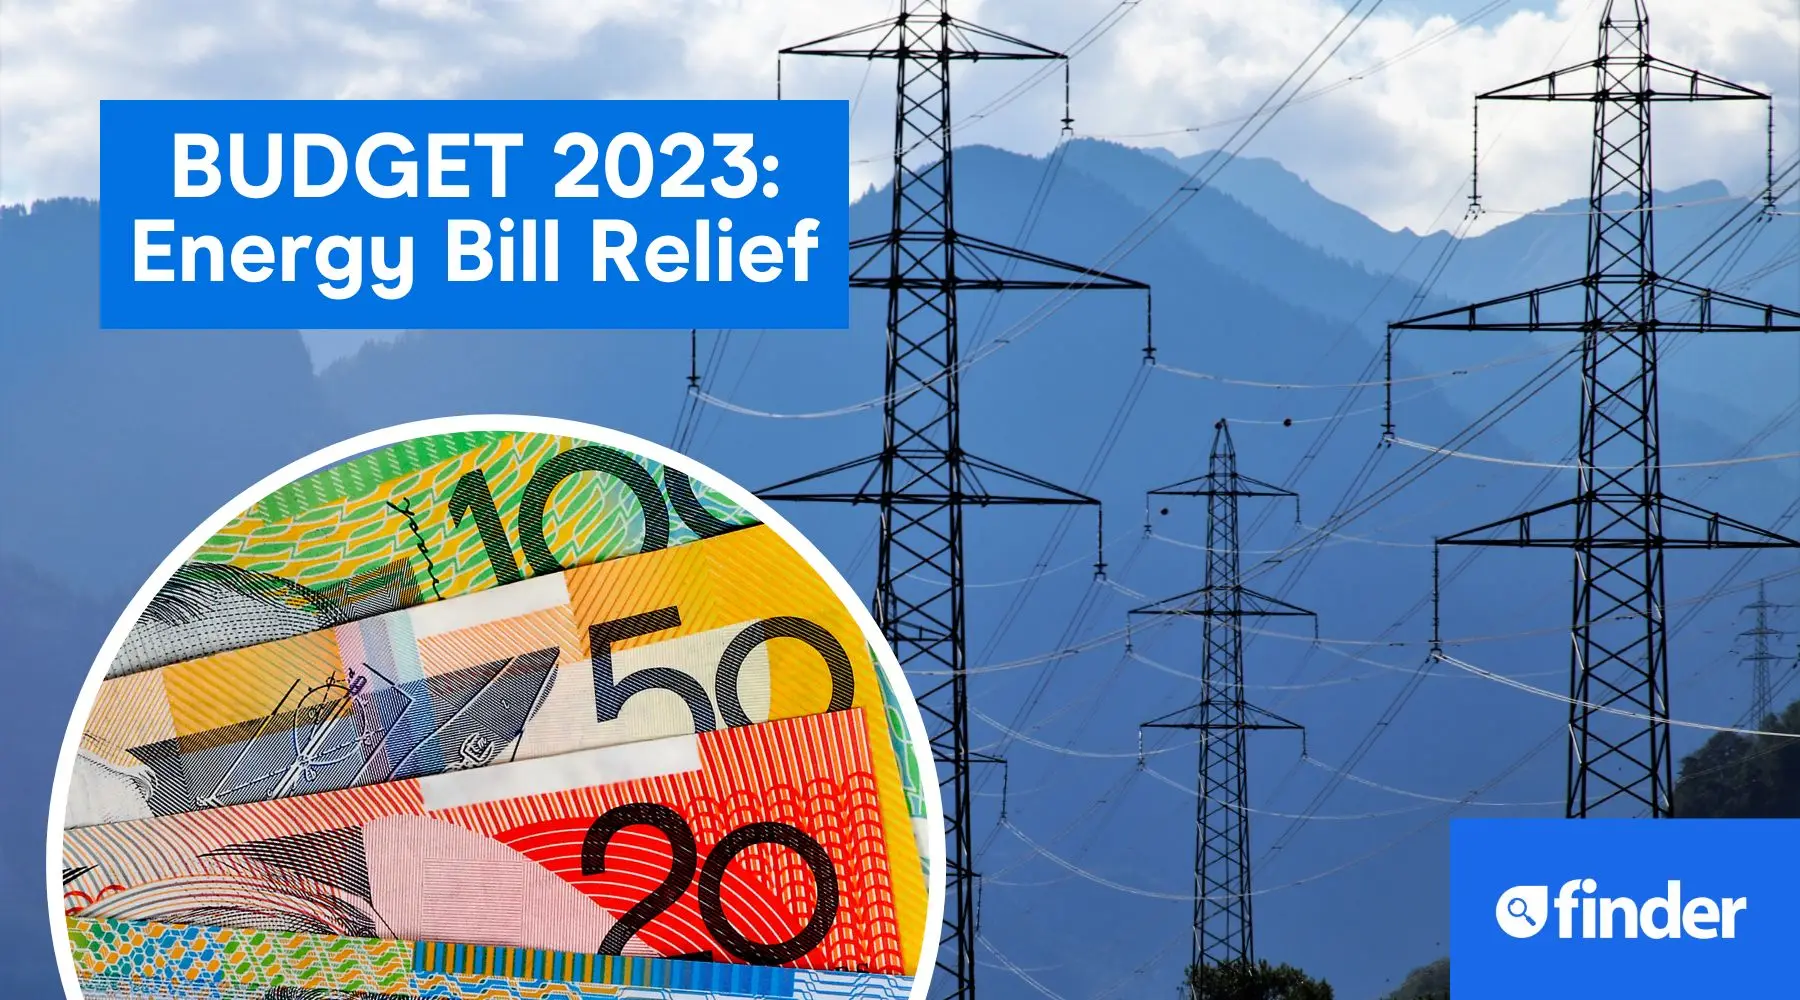 federal-budget-500-energy-bill-relief-are-you-eligible-i-finder